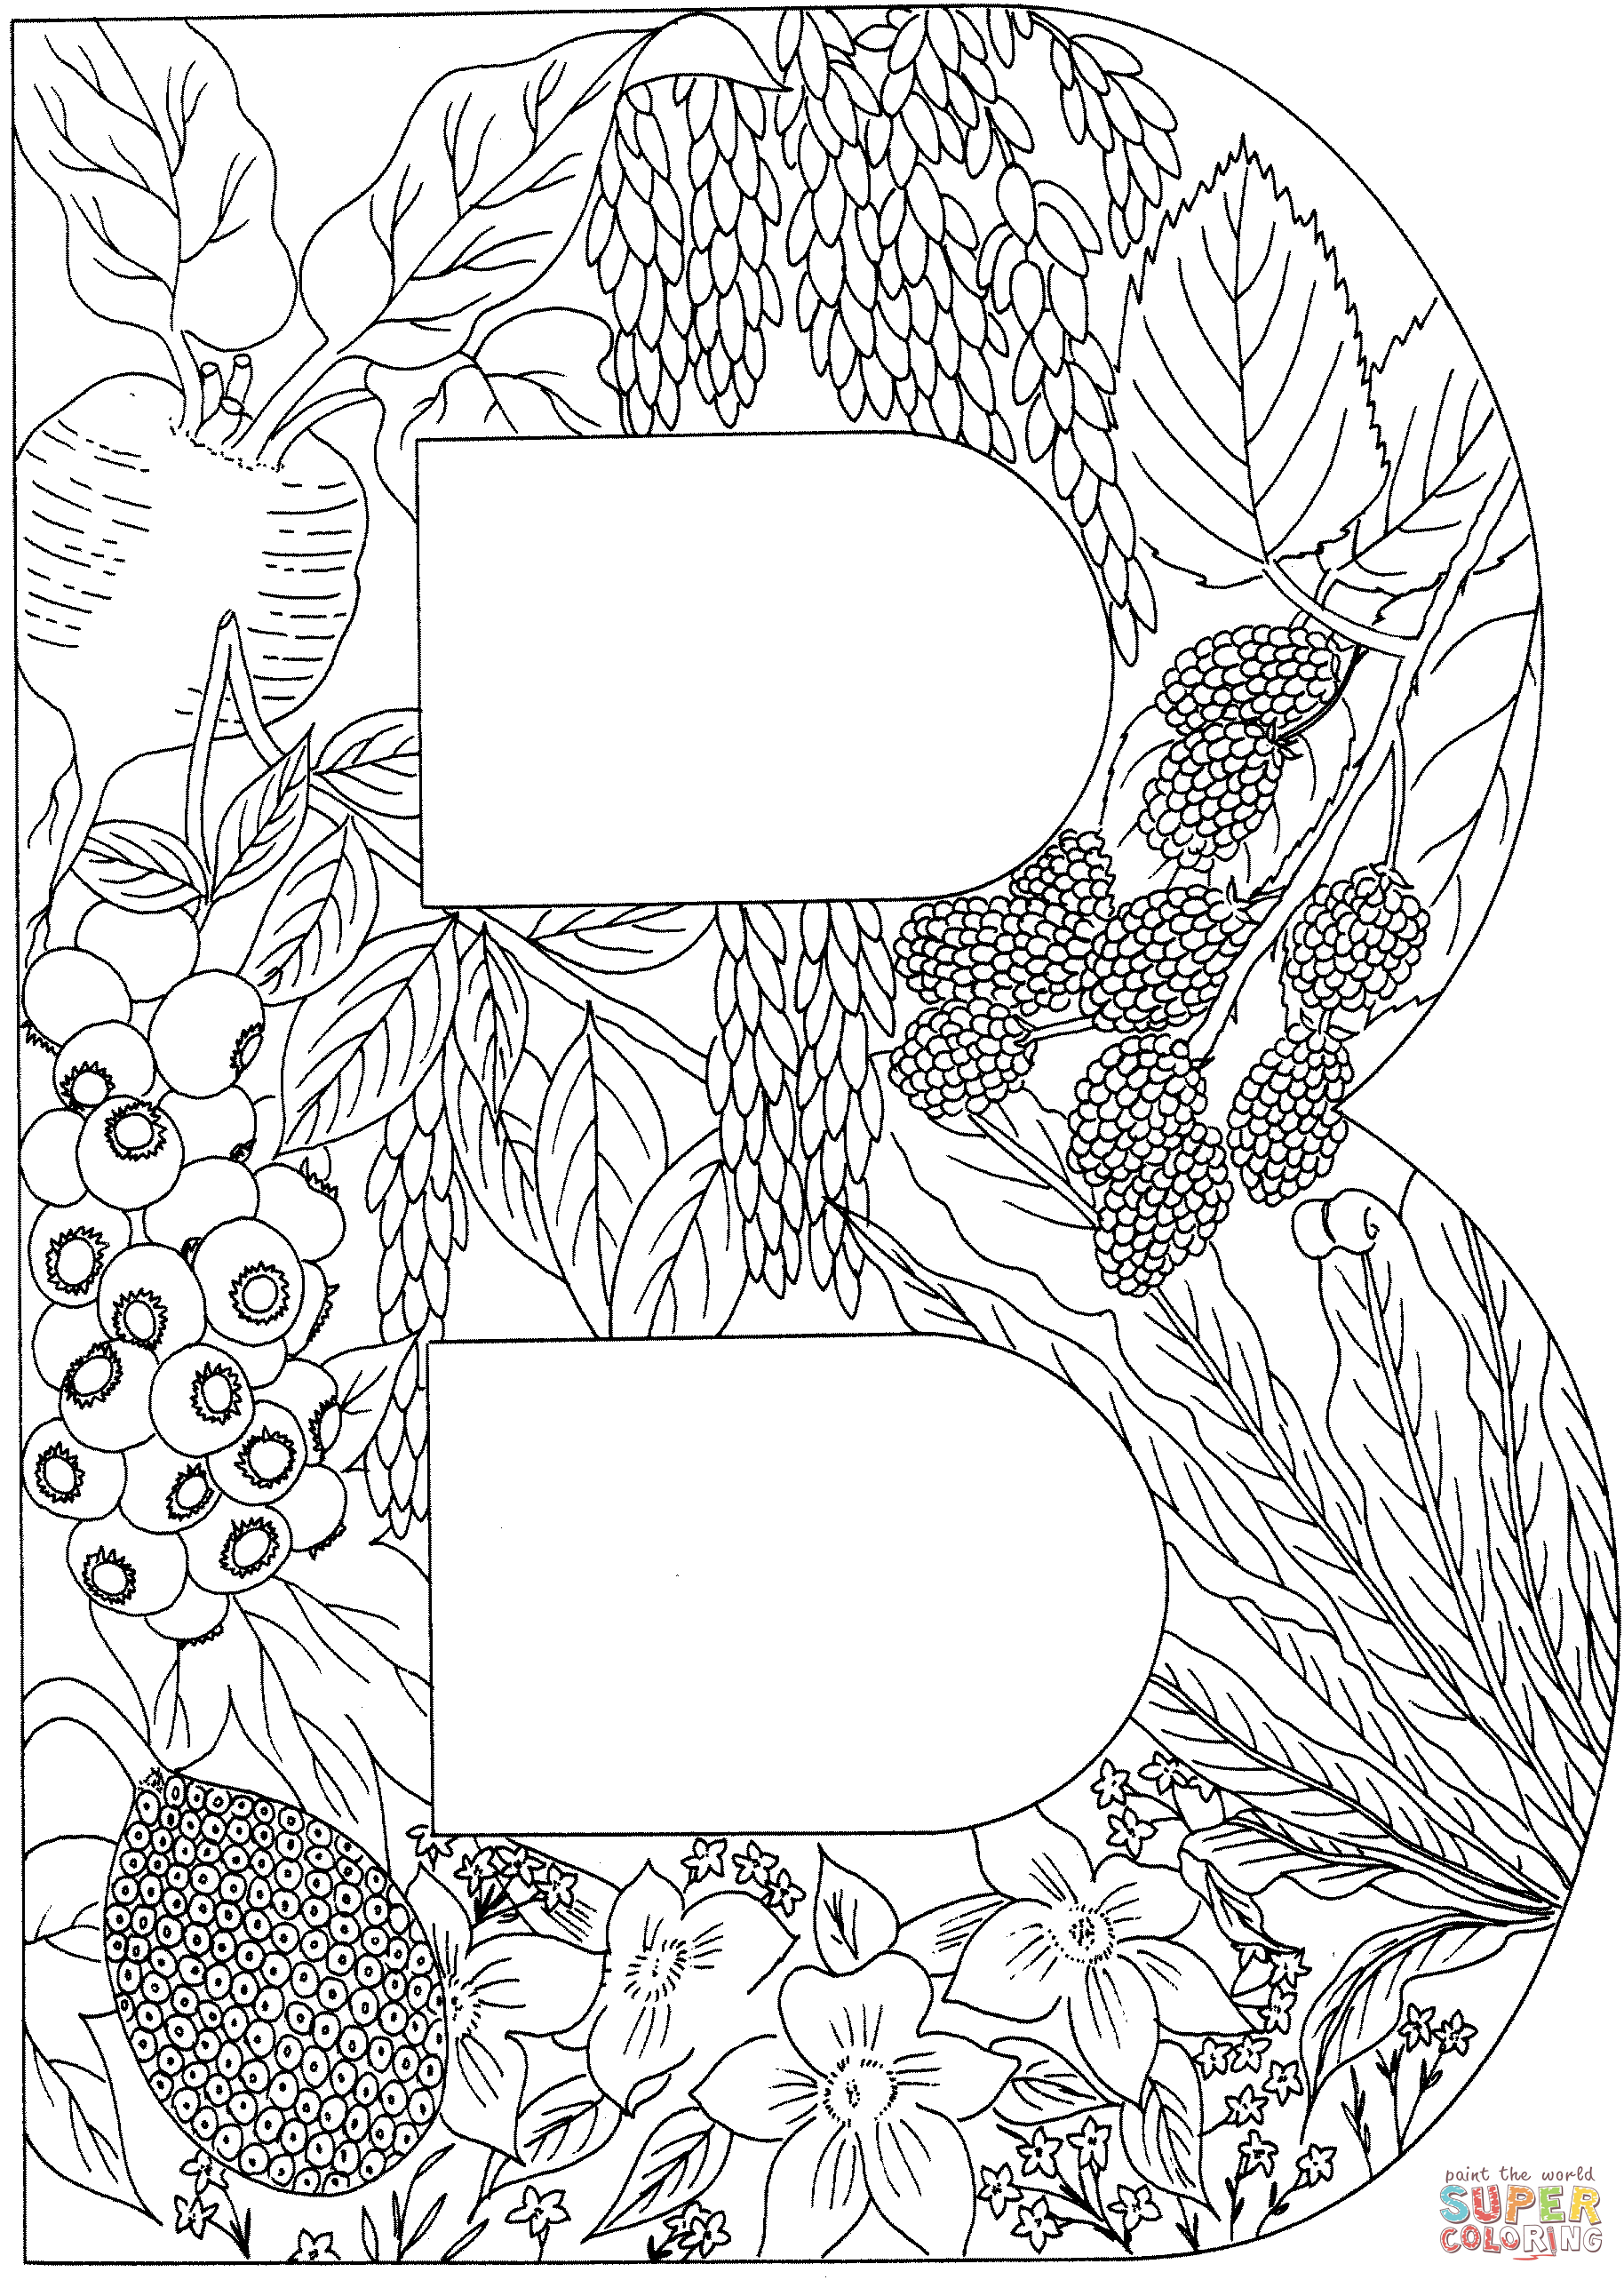 Free Coloring Pages Letters Adult Download Free Coloring Pages Letters